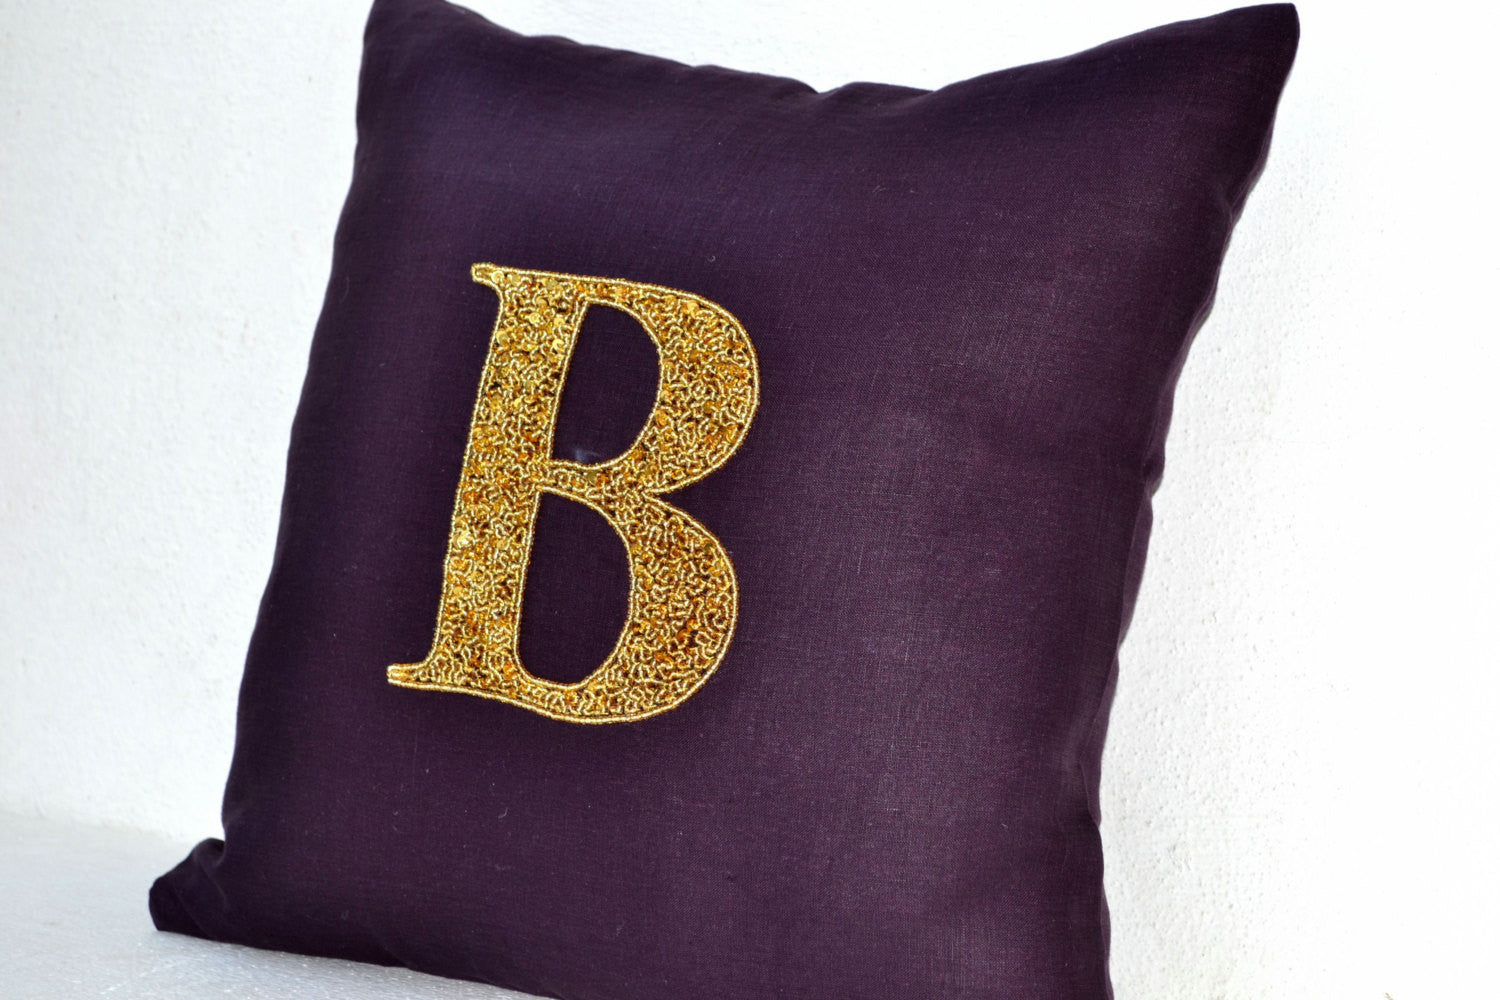 Handmade linen pillows with gold sequin and monogram